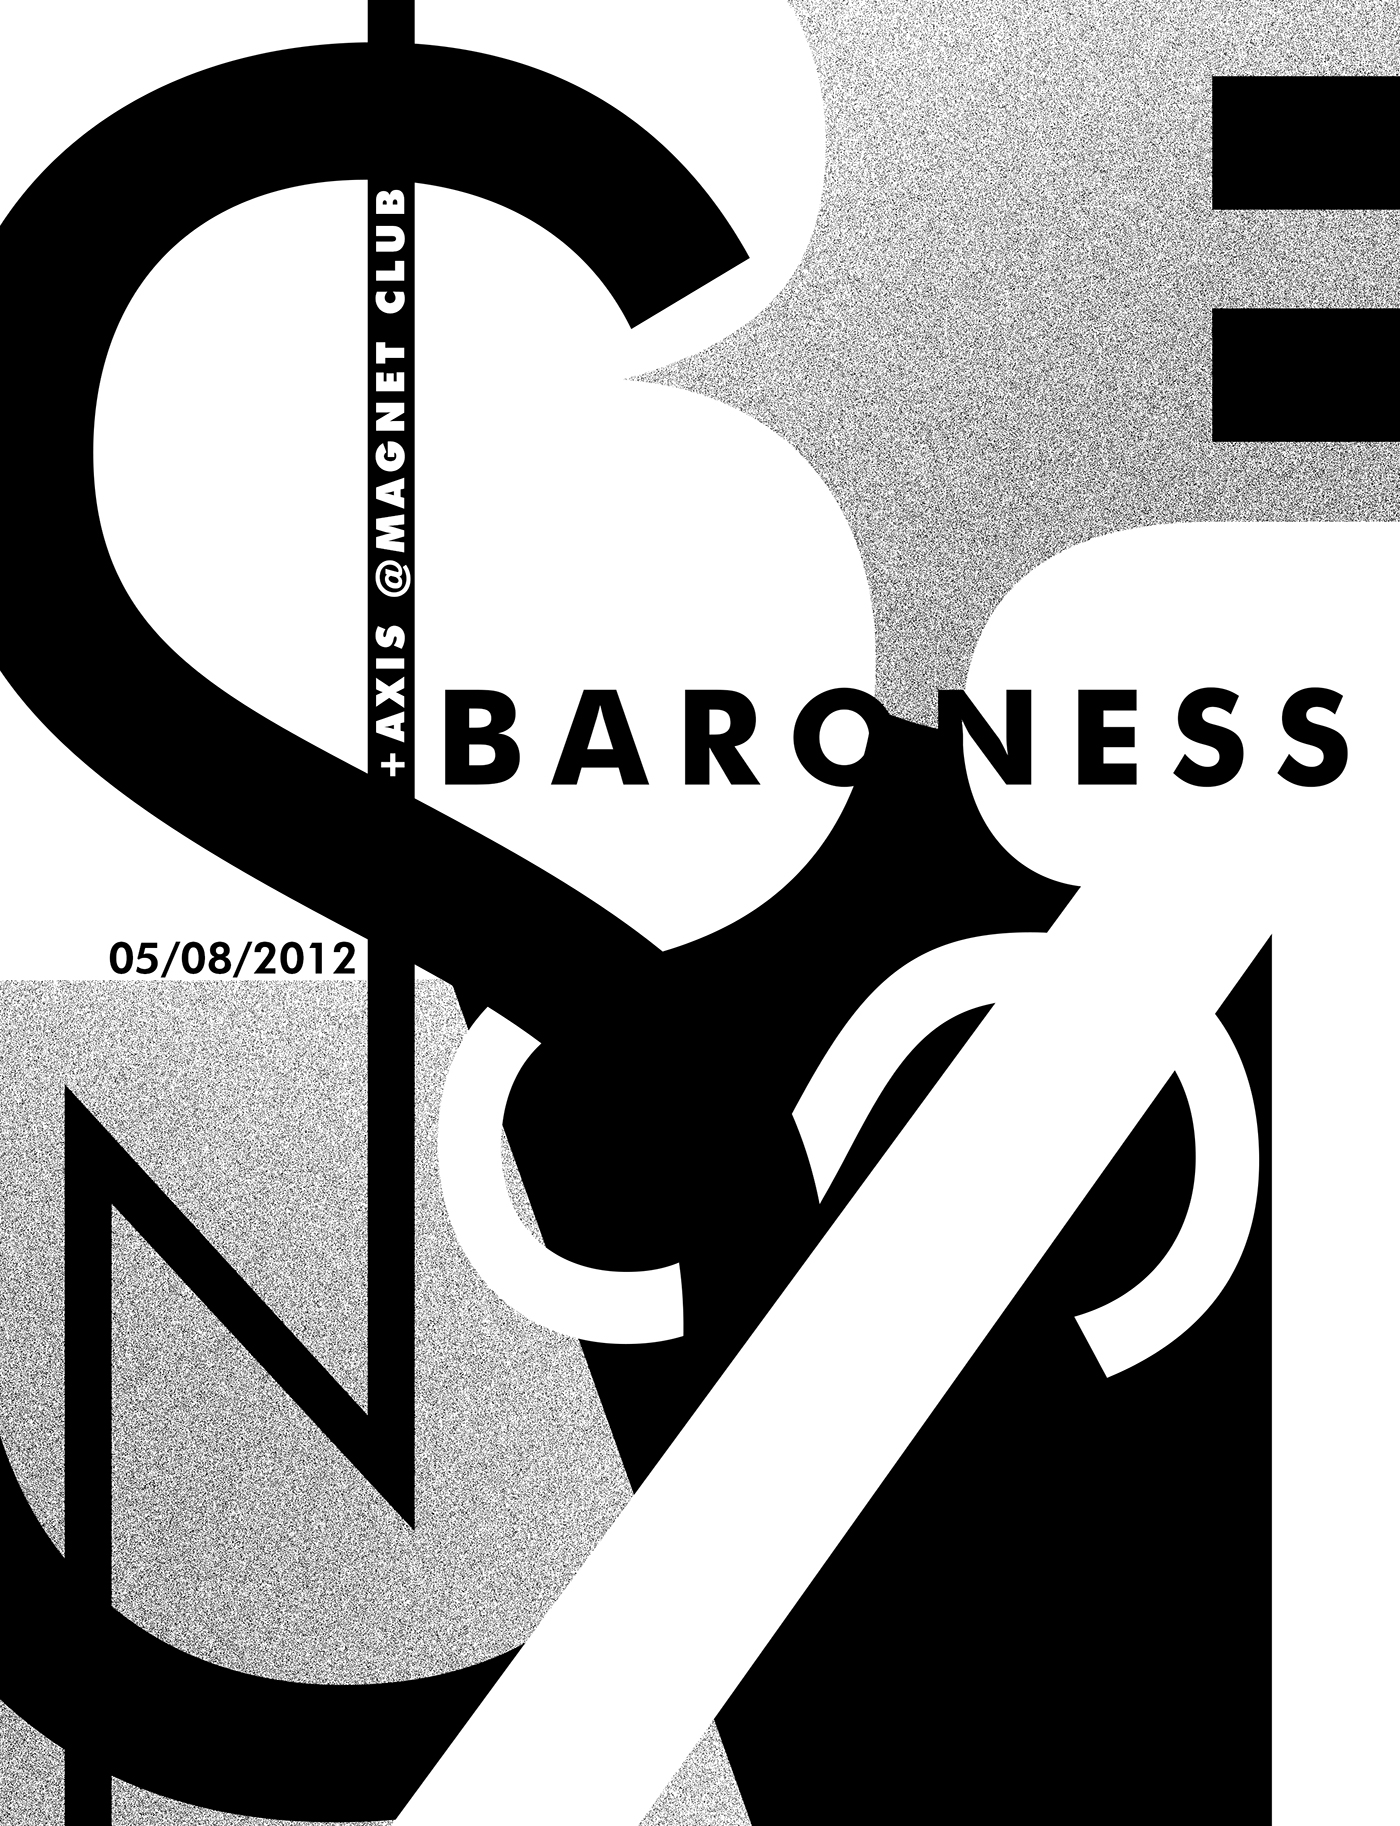 baroness  poster concert flyer  Music personal vector Futura black and white